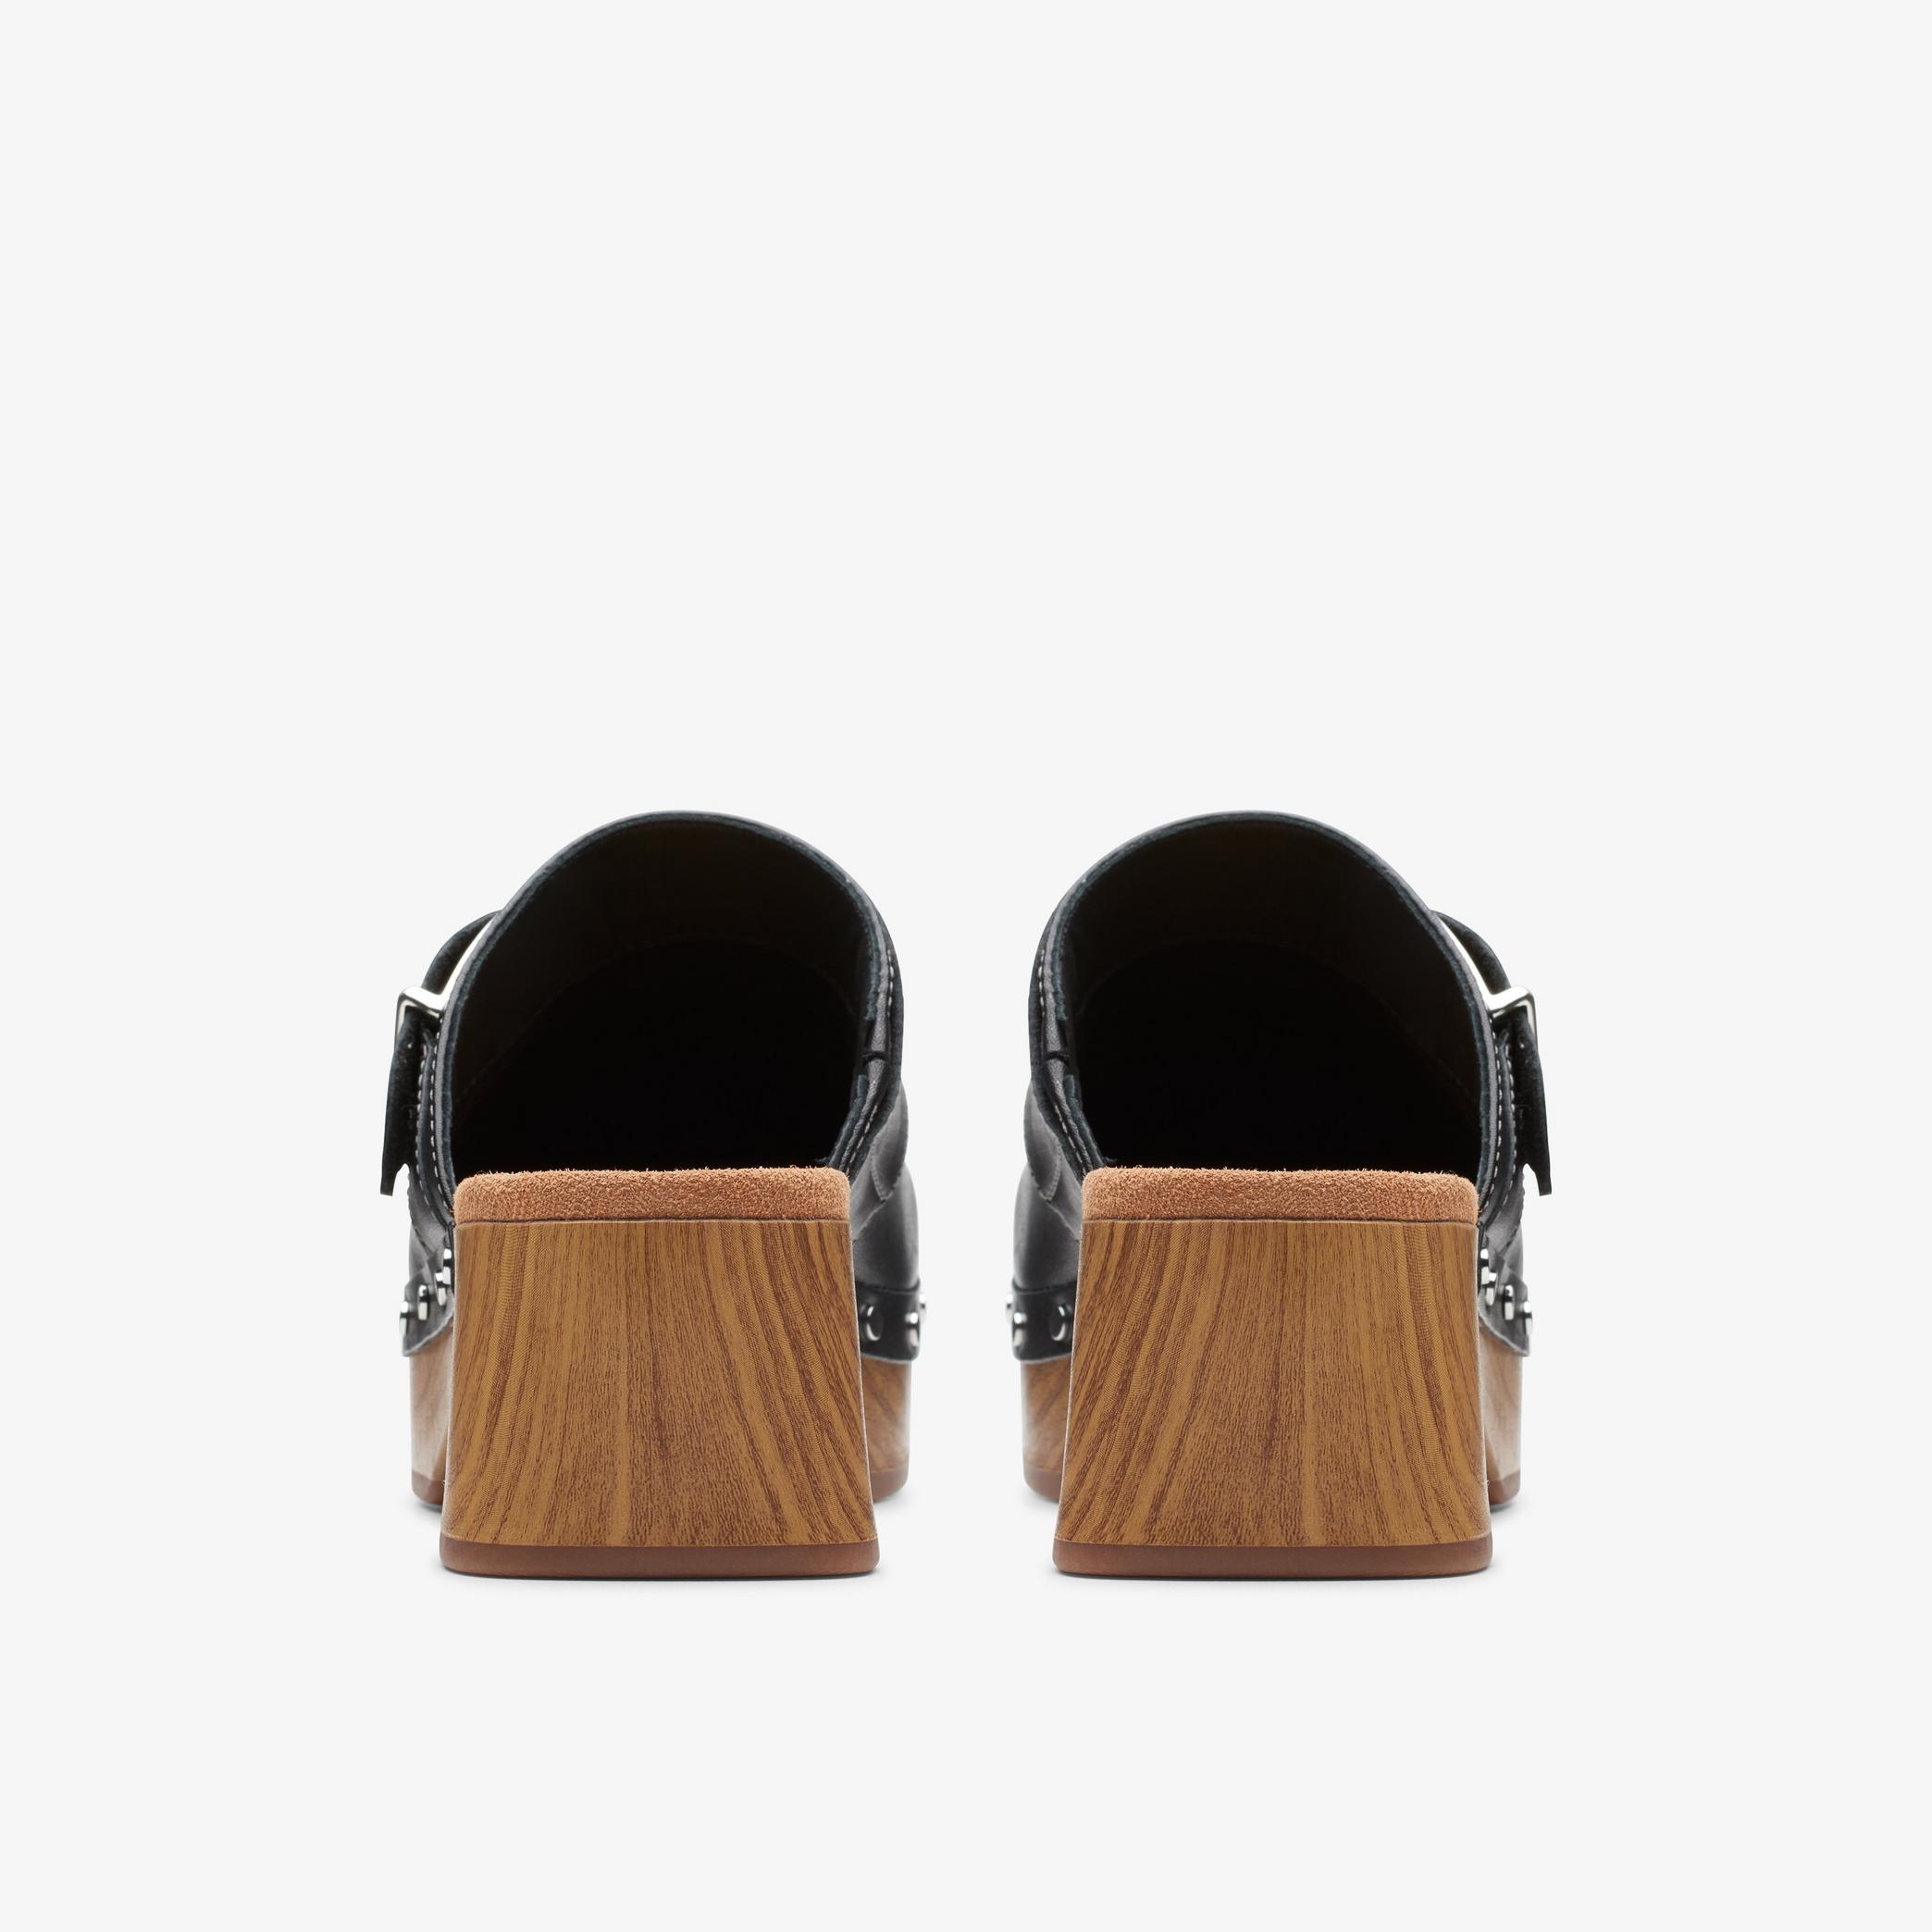 Sivanne Sun Black Leather Mules, view 5 of 6